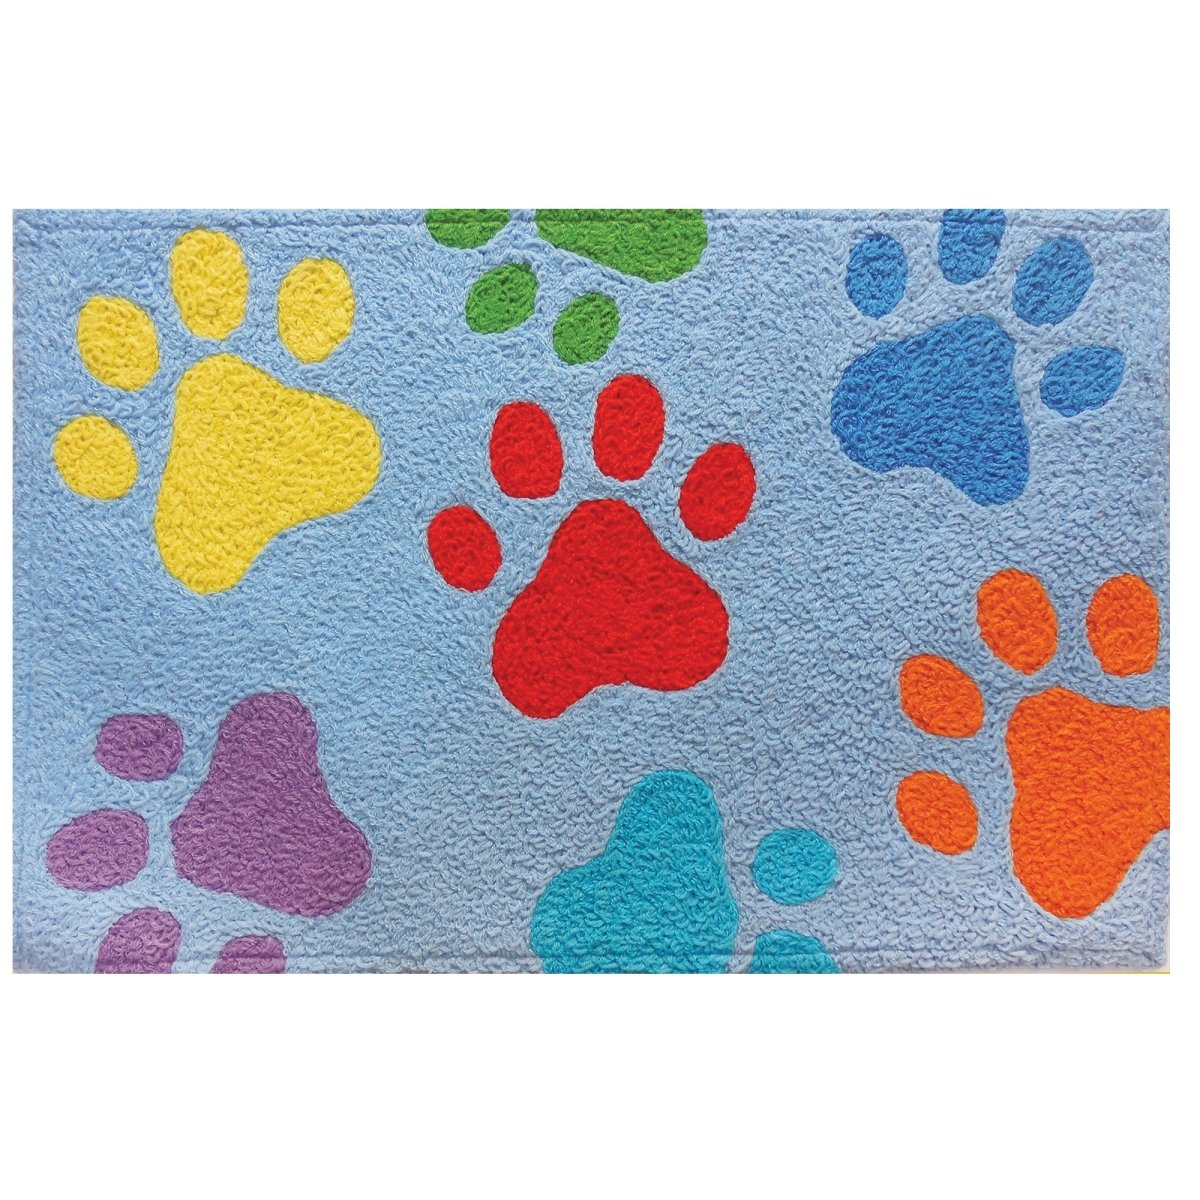 Jb-rr018 20 X 30 In. Colorful Paws Rug